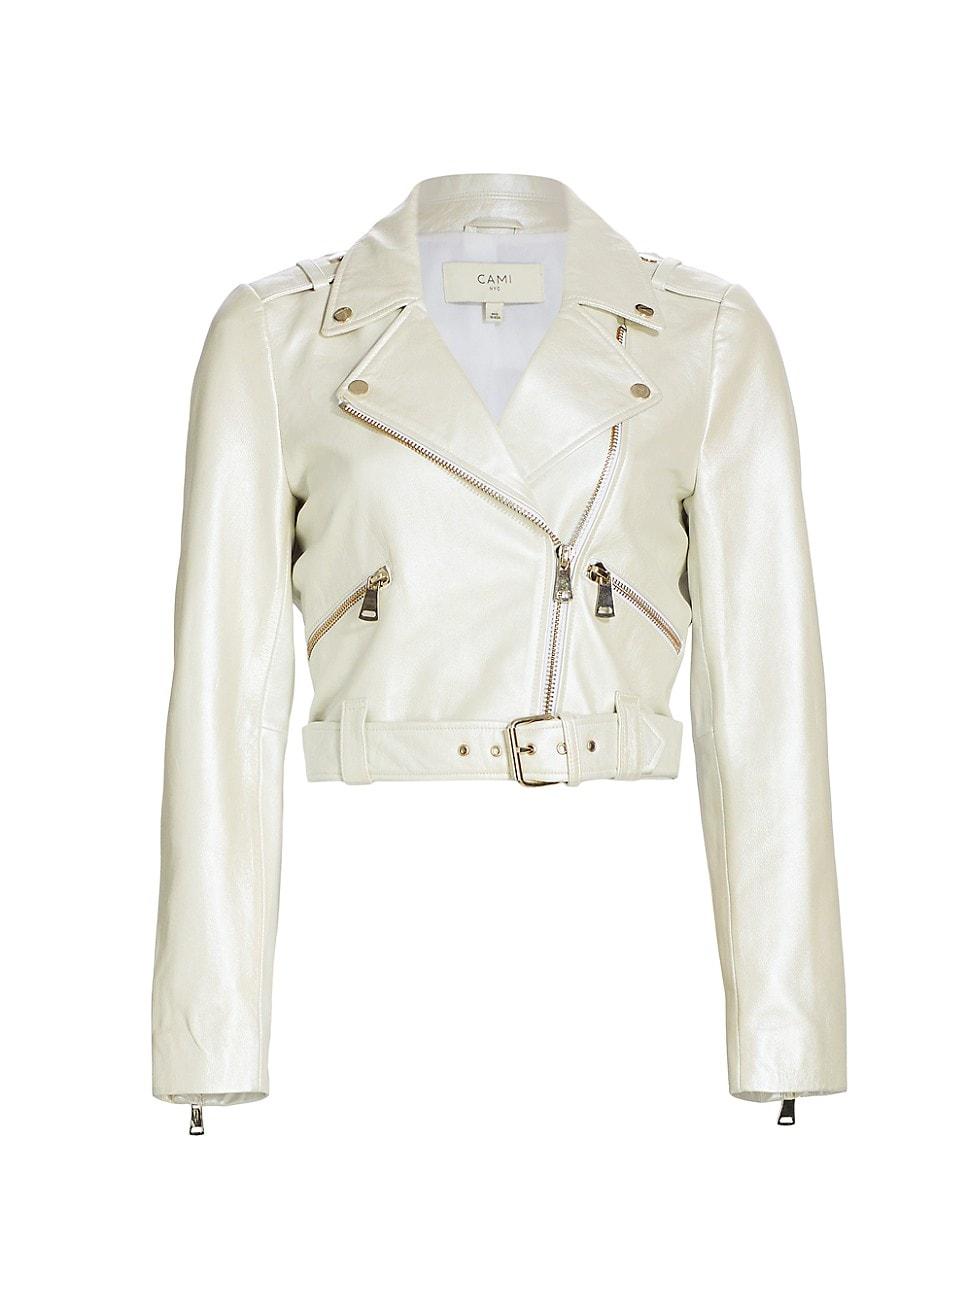 Cami NYC Kali Lamb Leather Moto Jacket in White | Lyst